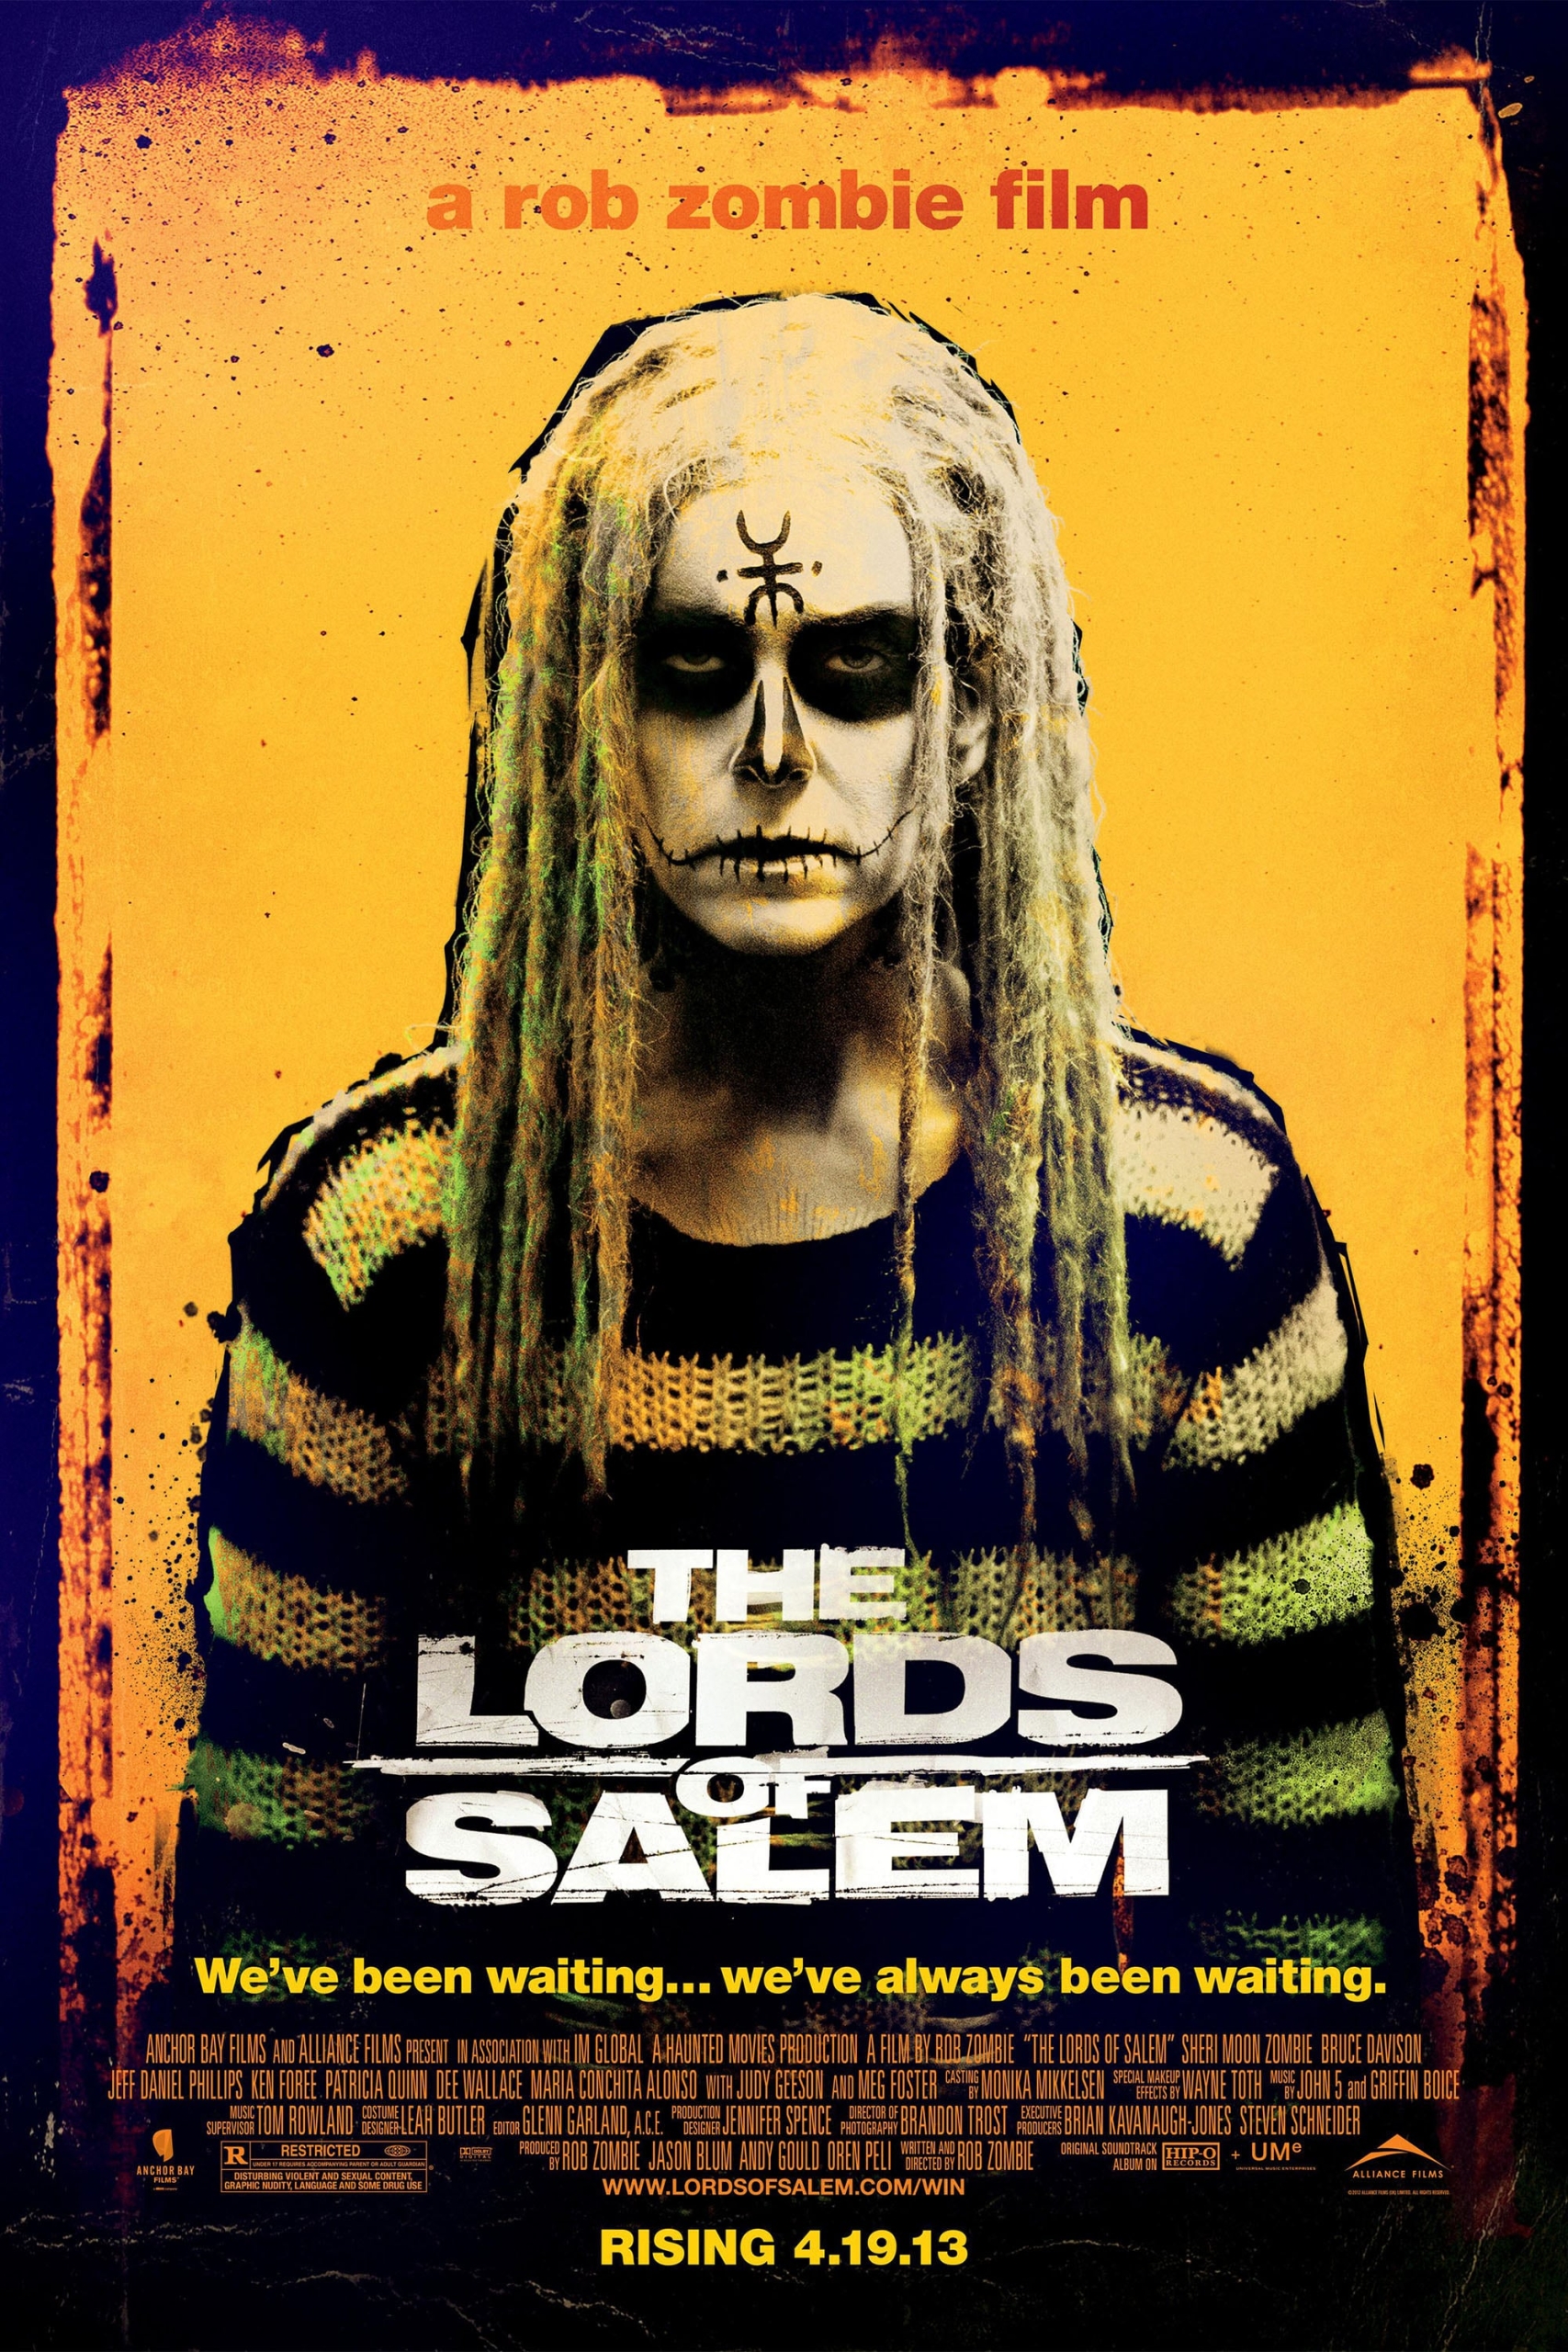 Poster for the movie "The Lords of Salem"